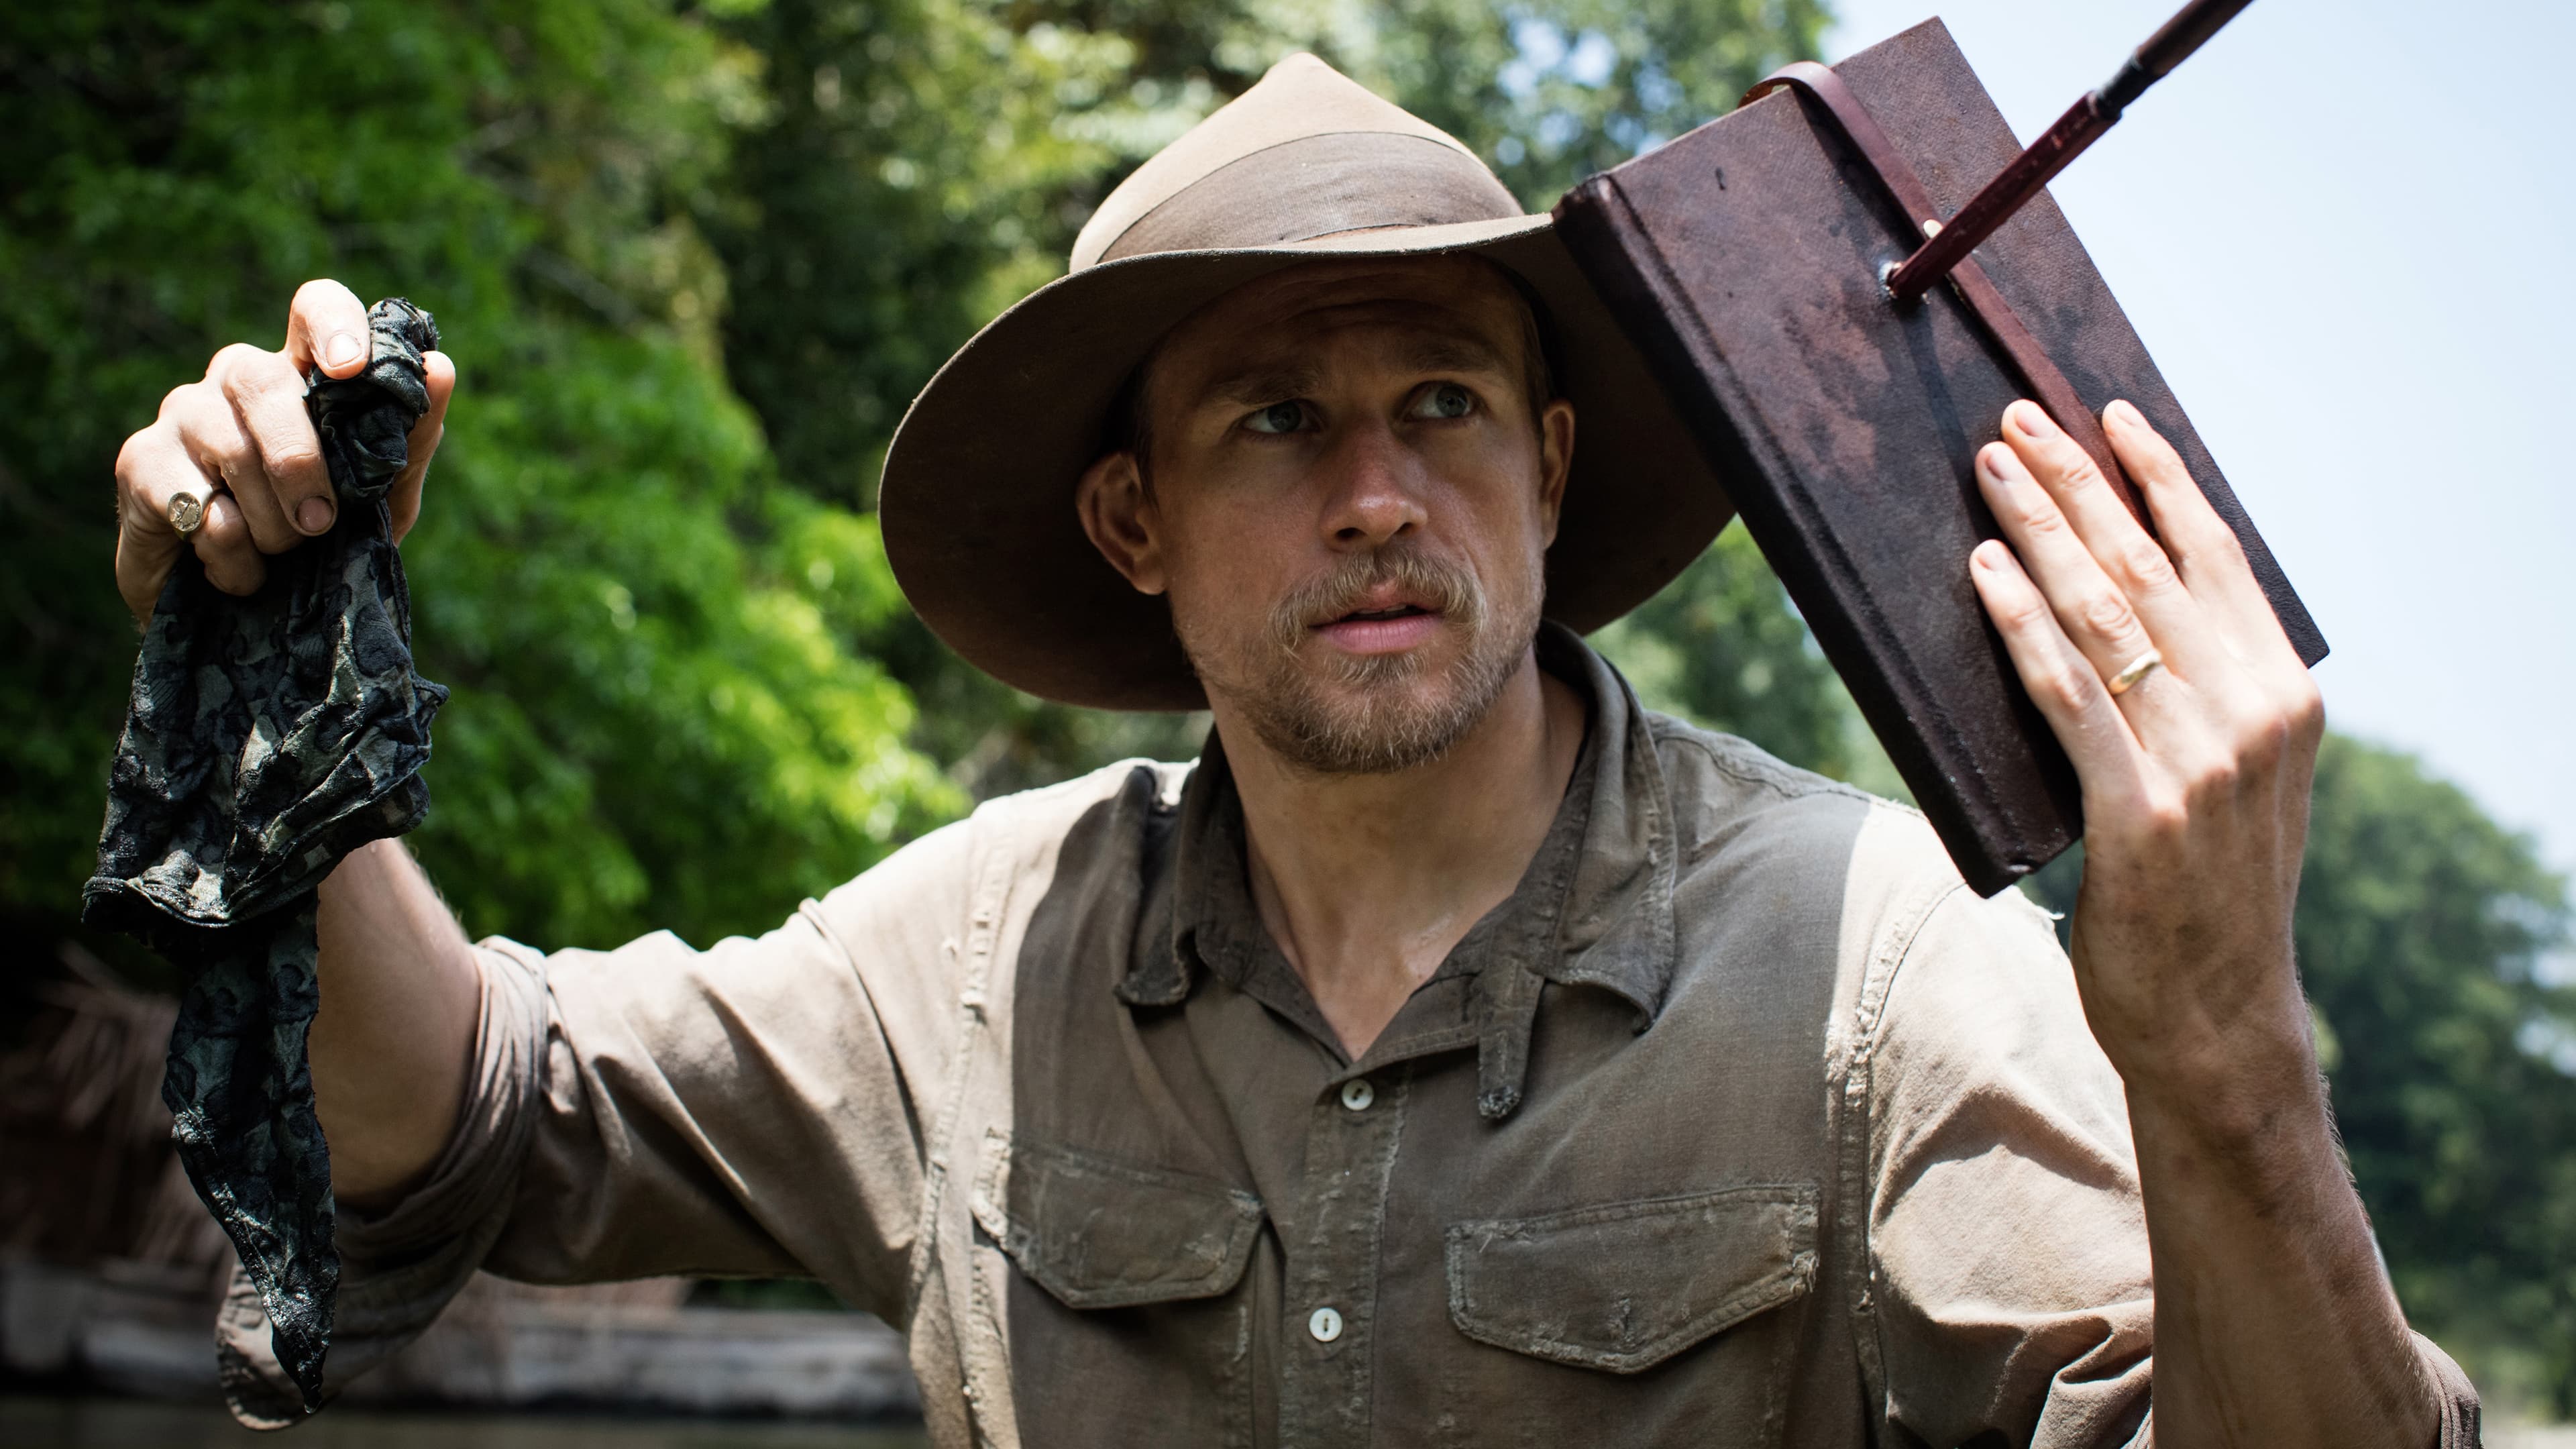 The Lost City of Z (2017)